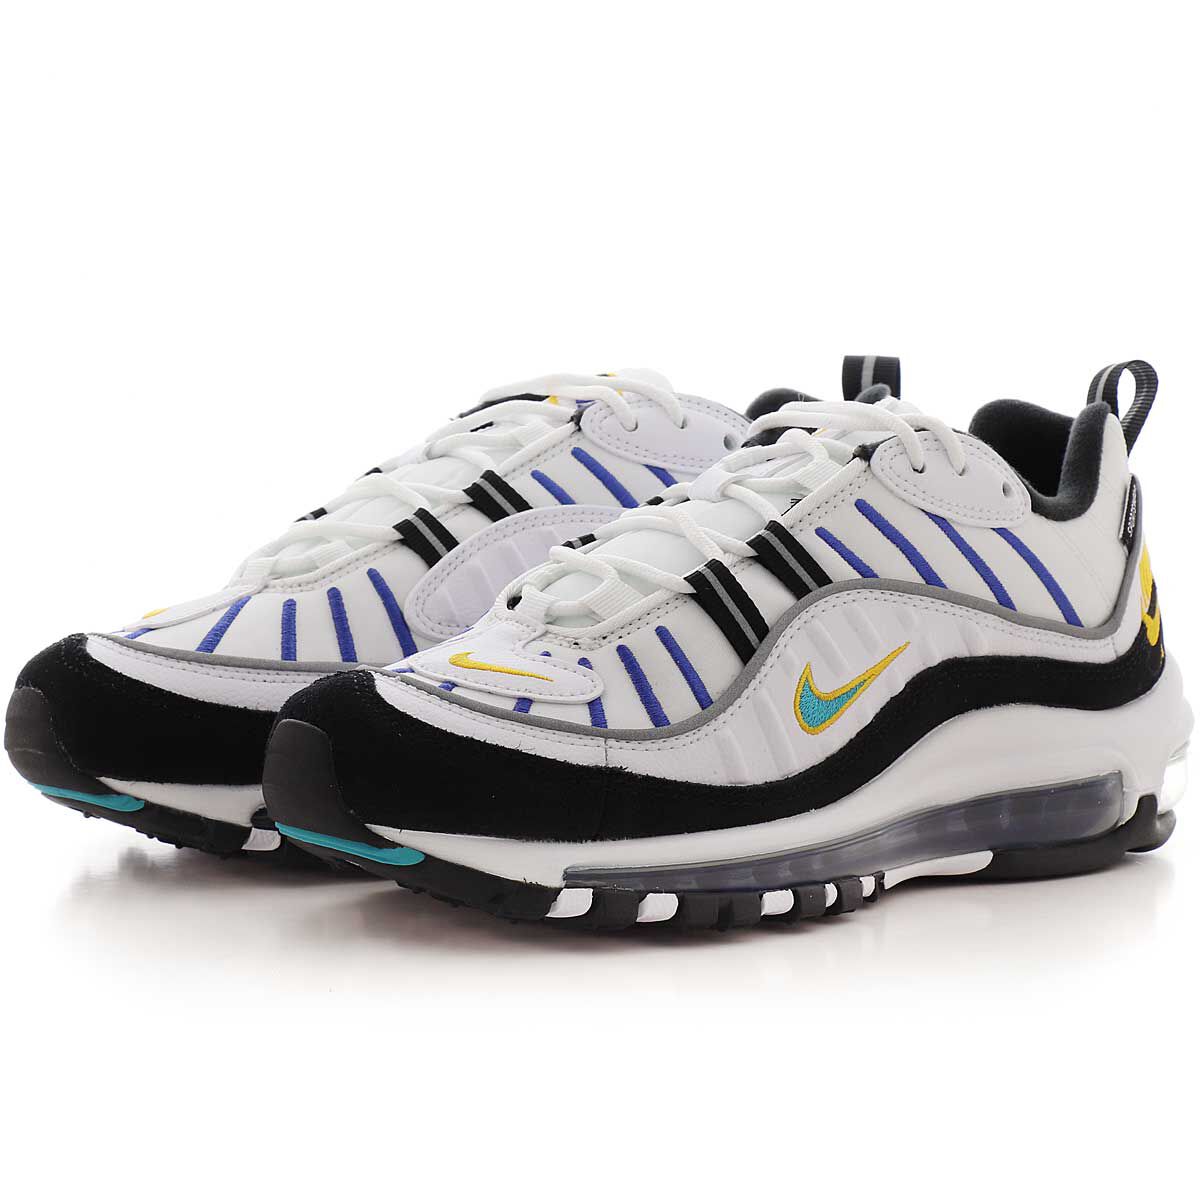 air max 98 limited edition